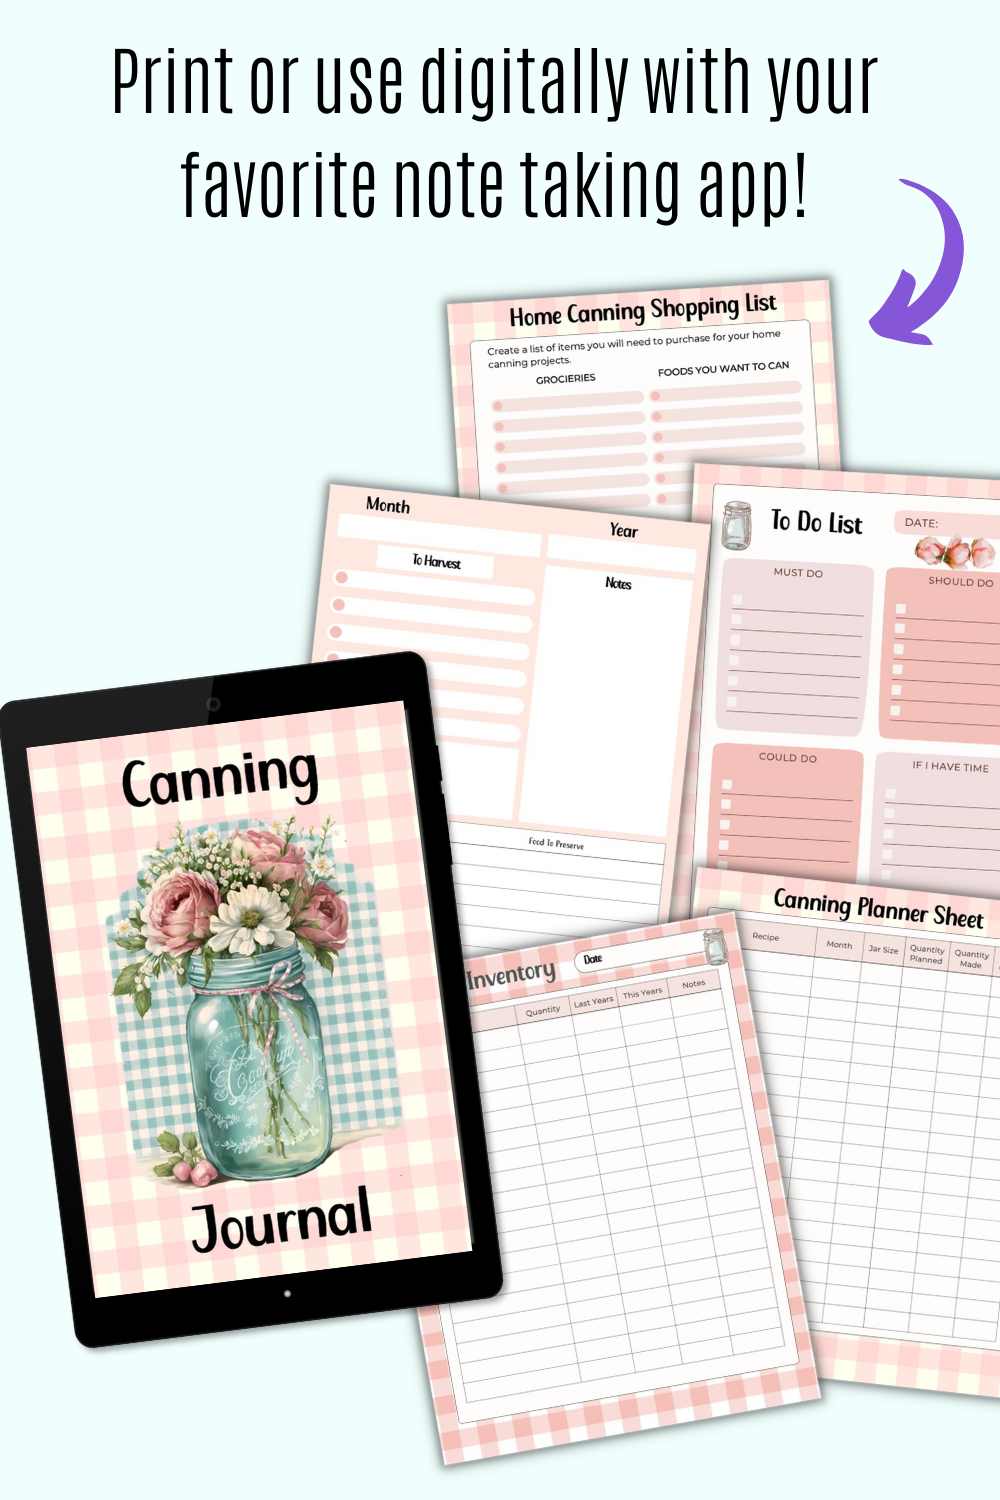 Using a PDF home canning planner with a tablet